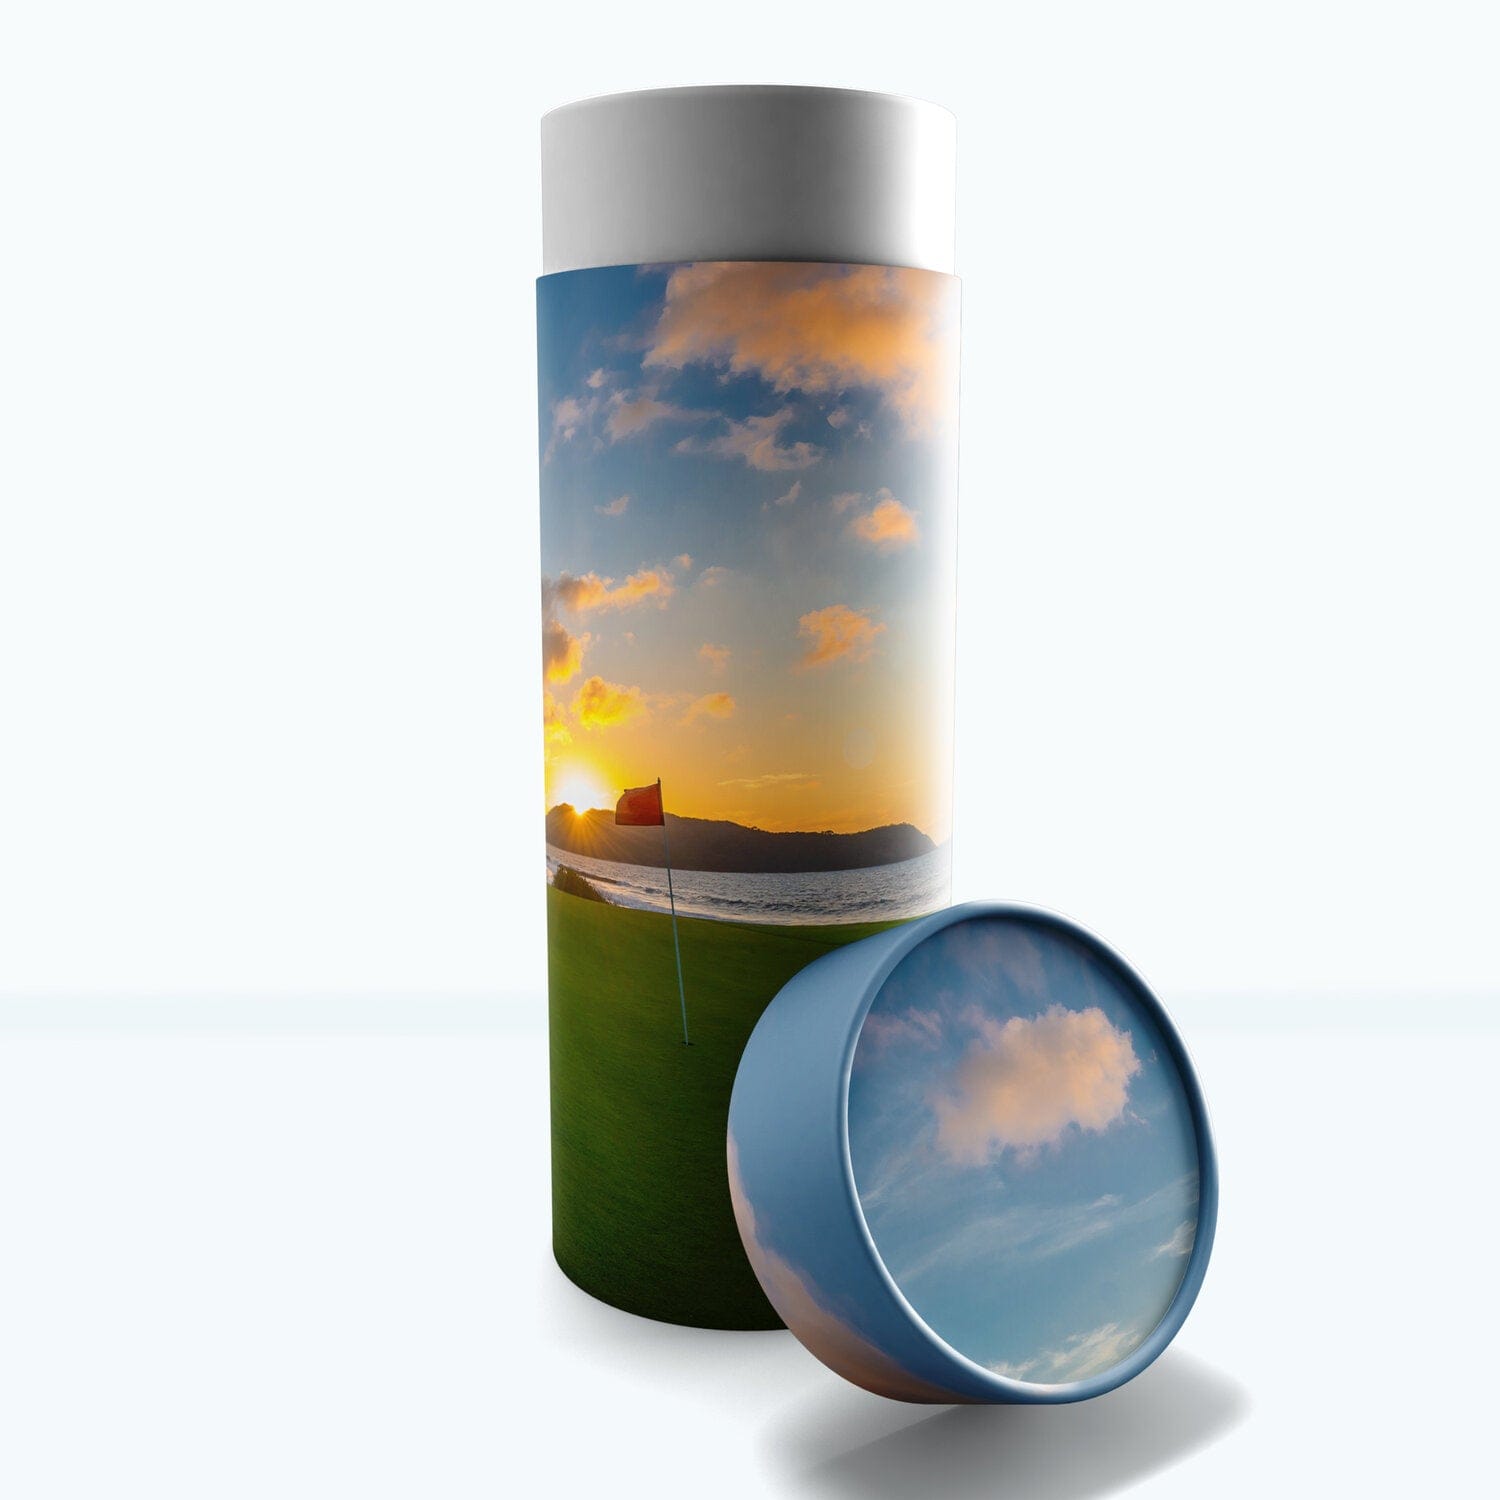 Commemorative Cremation Urns Scattering Tube 19th Hole Golf Biodegradable & Eco Friendly Burial or Scattering Urn / Tube